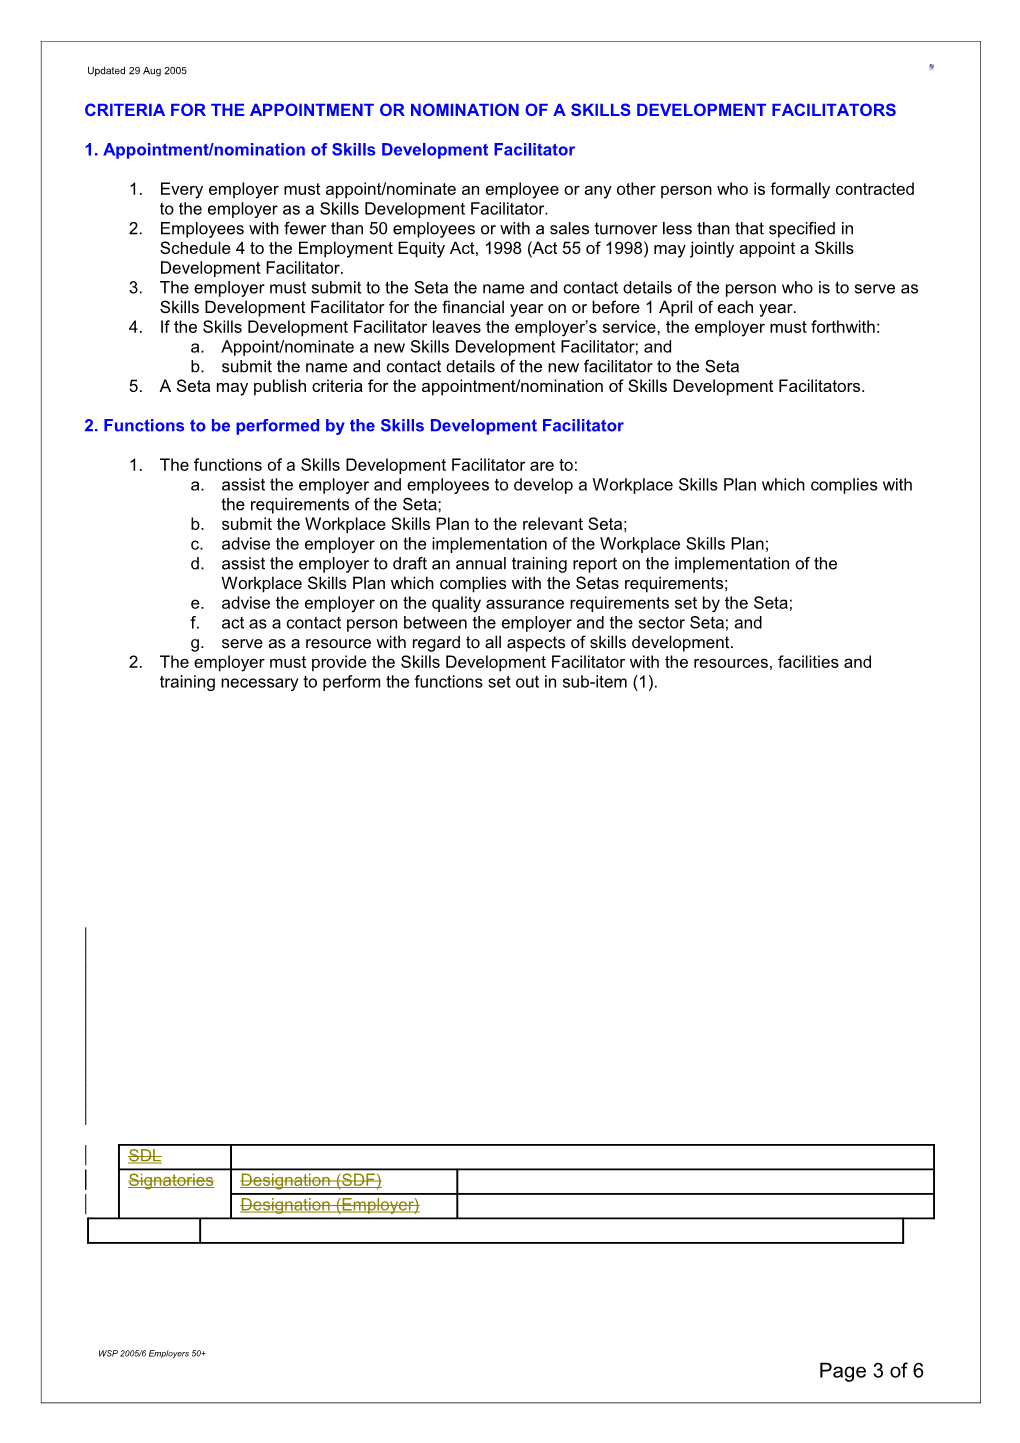 Workplace Skills Plan (WSP) Grant Application & Guidelines s5